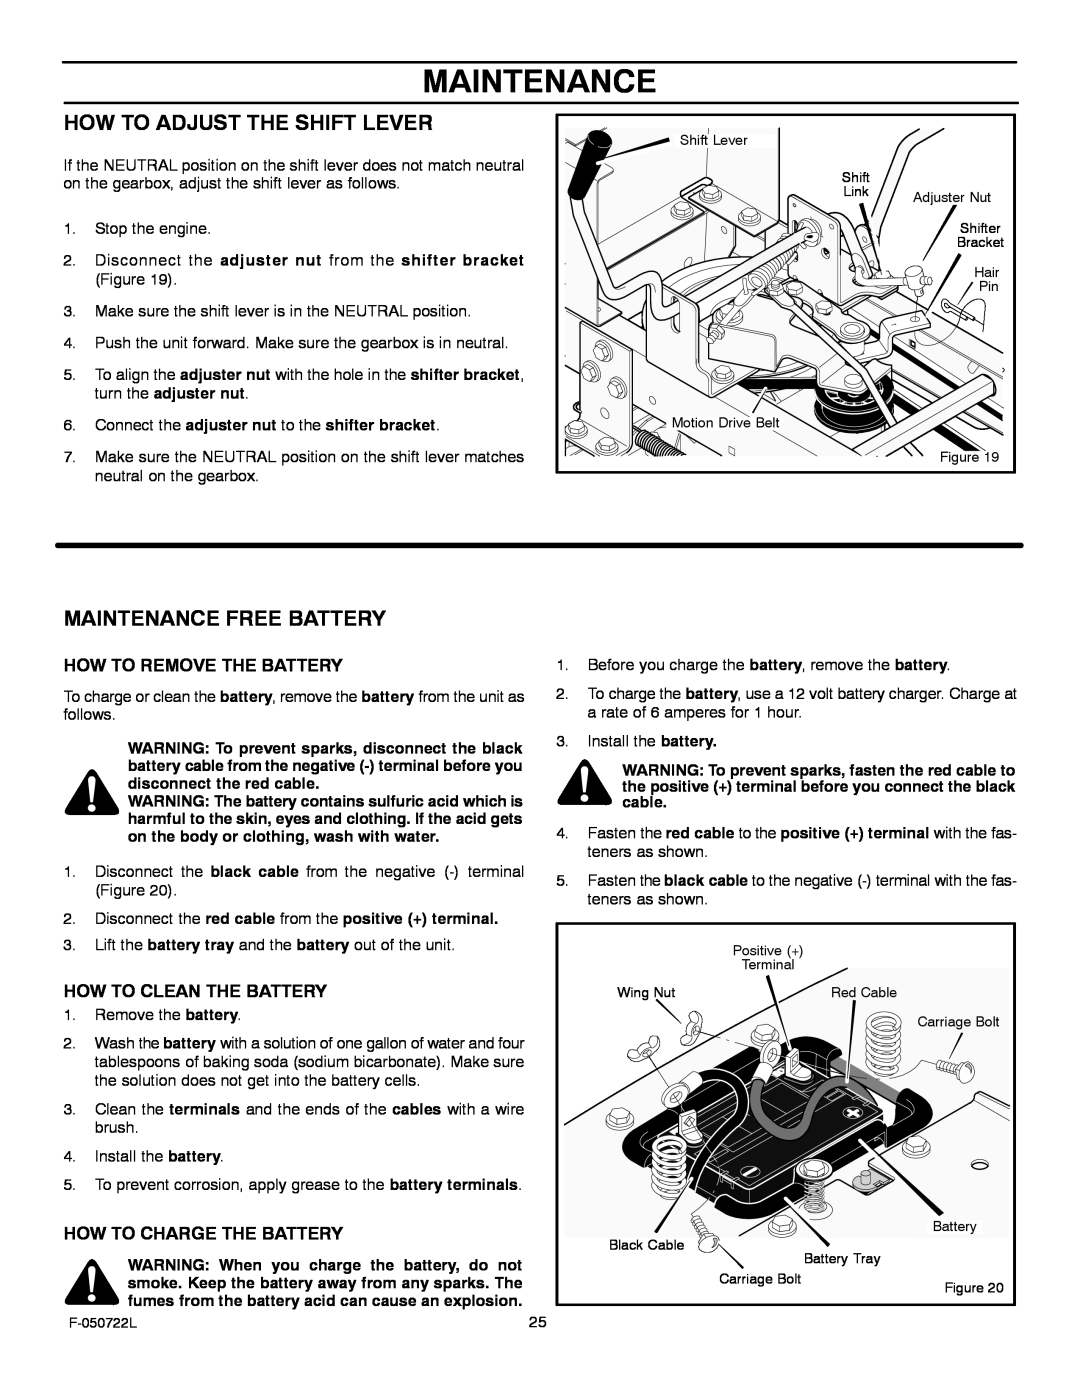 Murray 425001x99A manual How To Adjust The Shift Lever, Maintenance Free Battery, How To Remove The Battery 